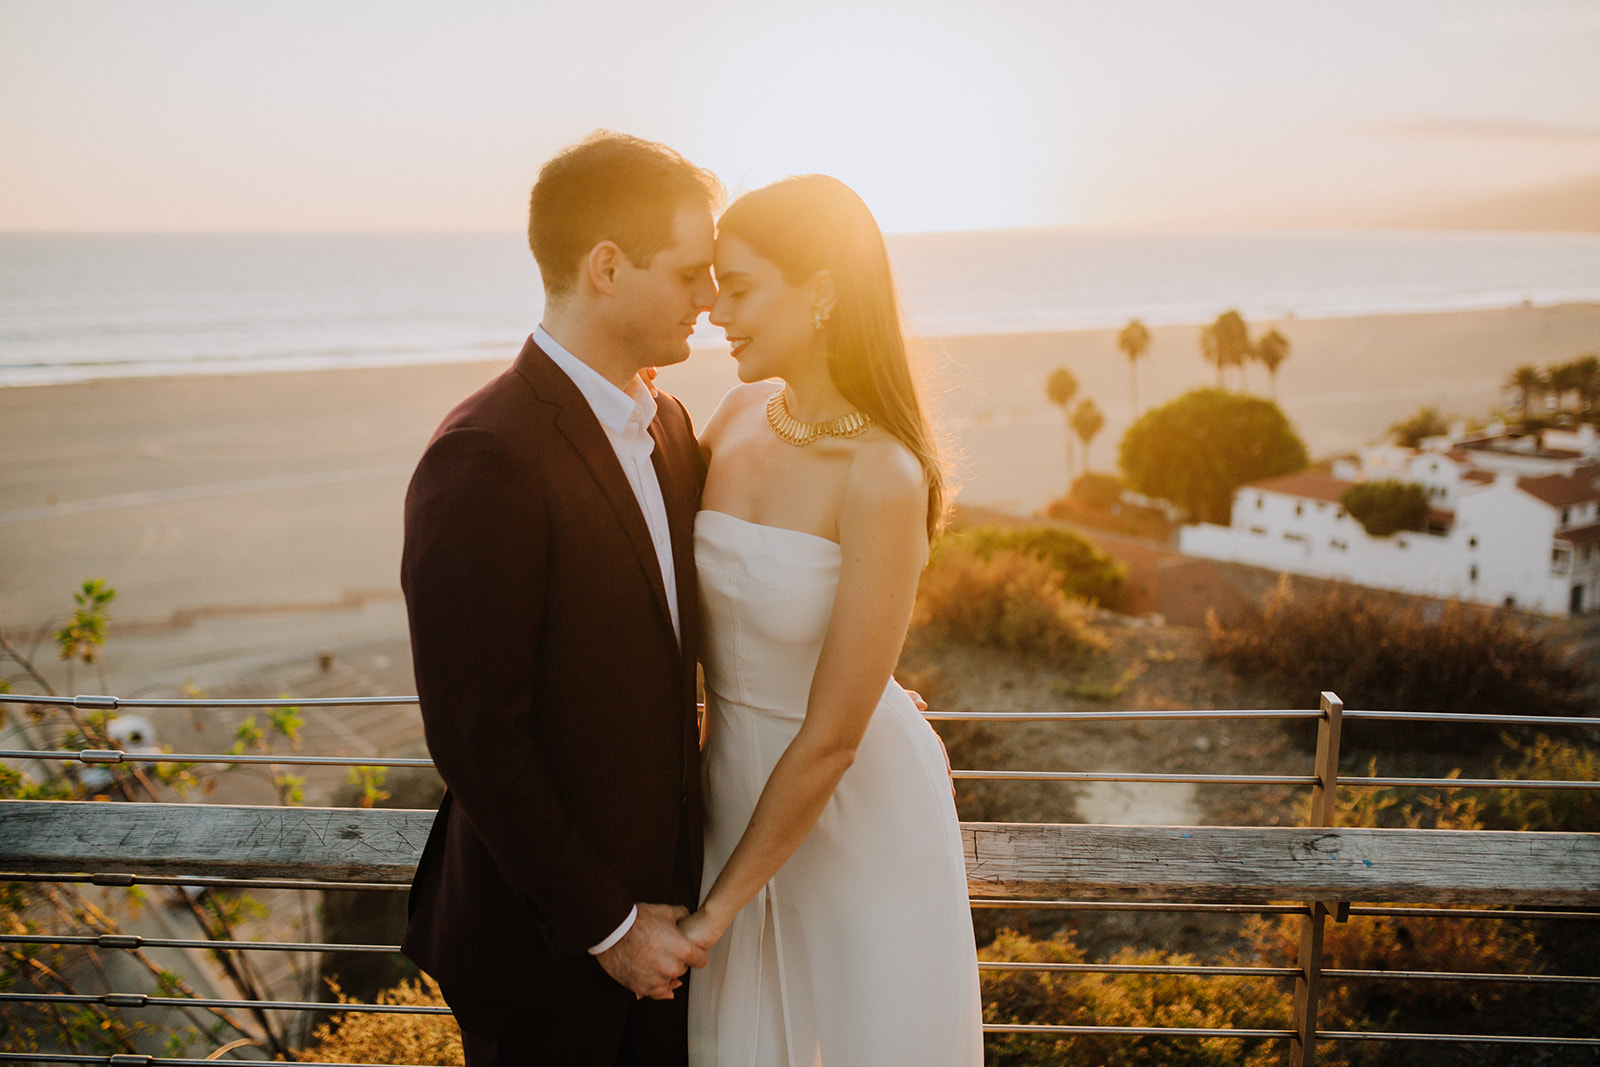 couple pose together with the beautiful beach in the background during their dreamy wedding rehearsal photography